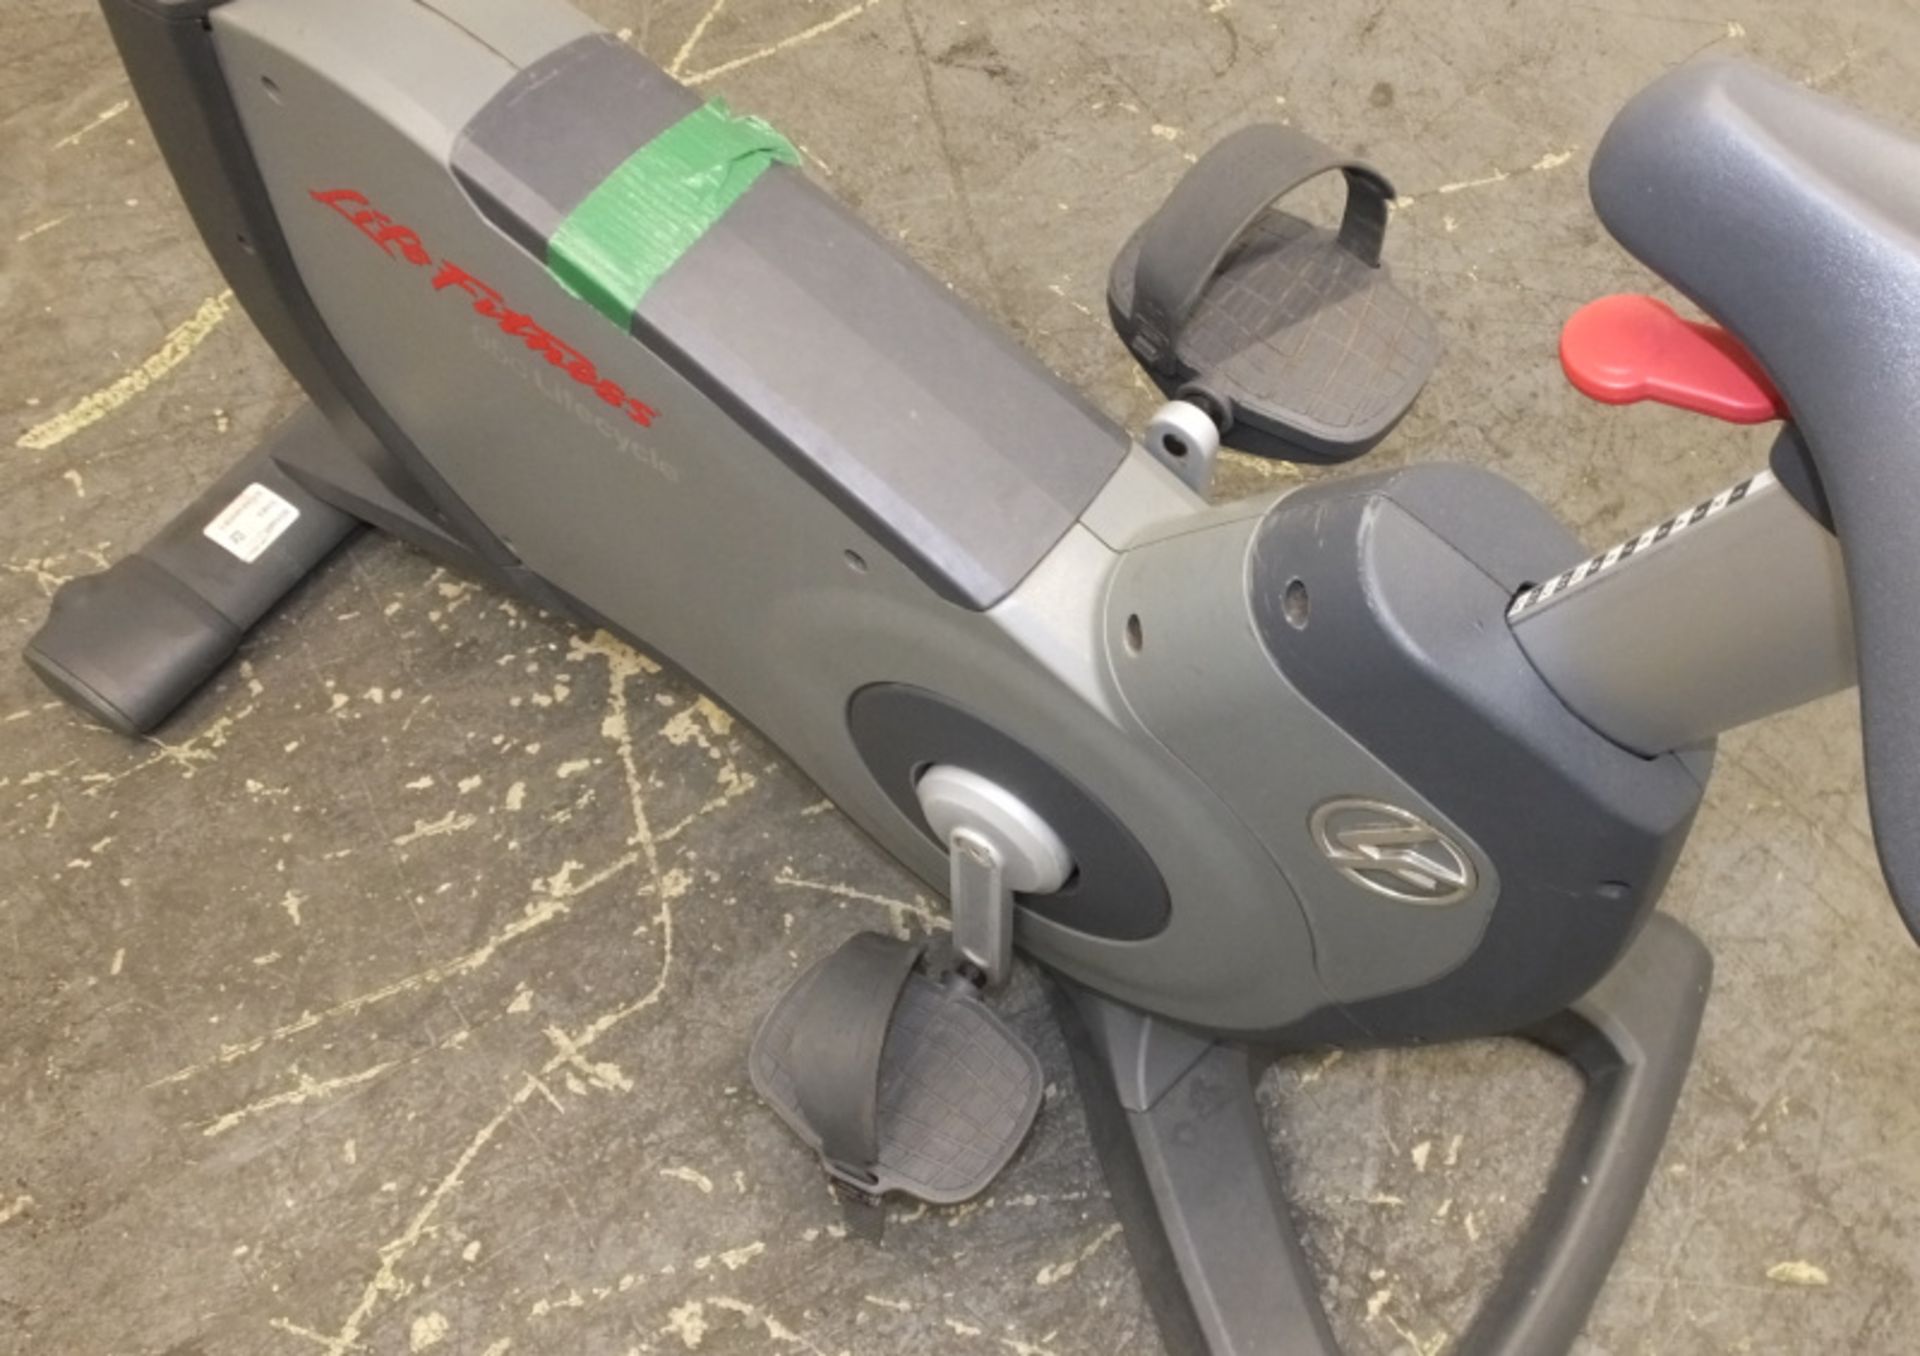 Life Fitness 95c Lifecycle Exercise Bike - Please check pictures for condition - Image 4 of 13